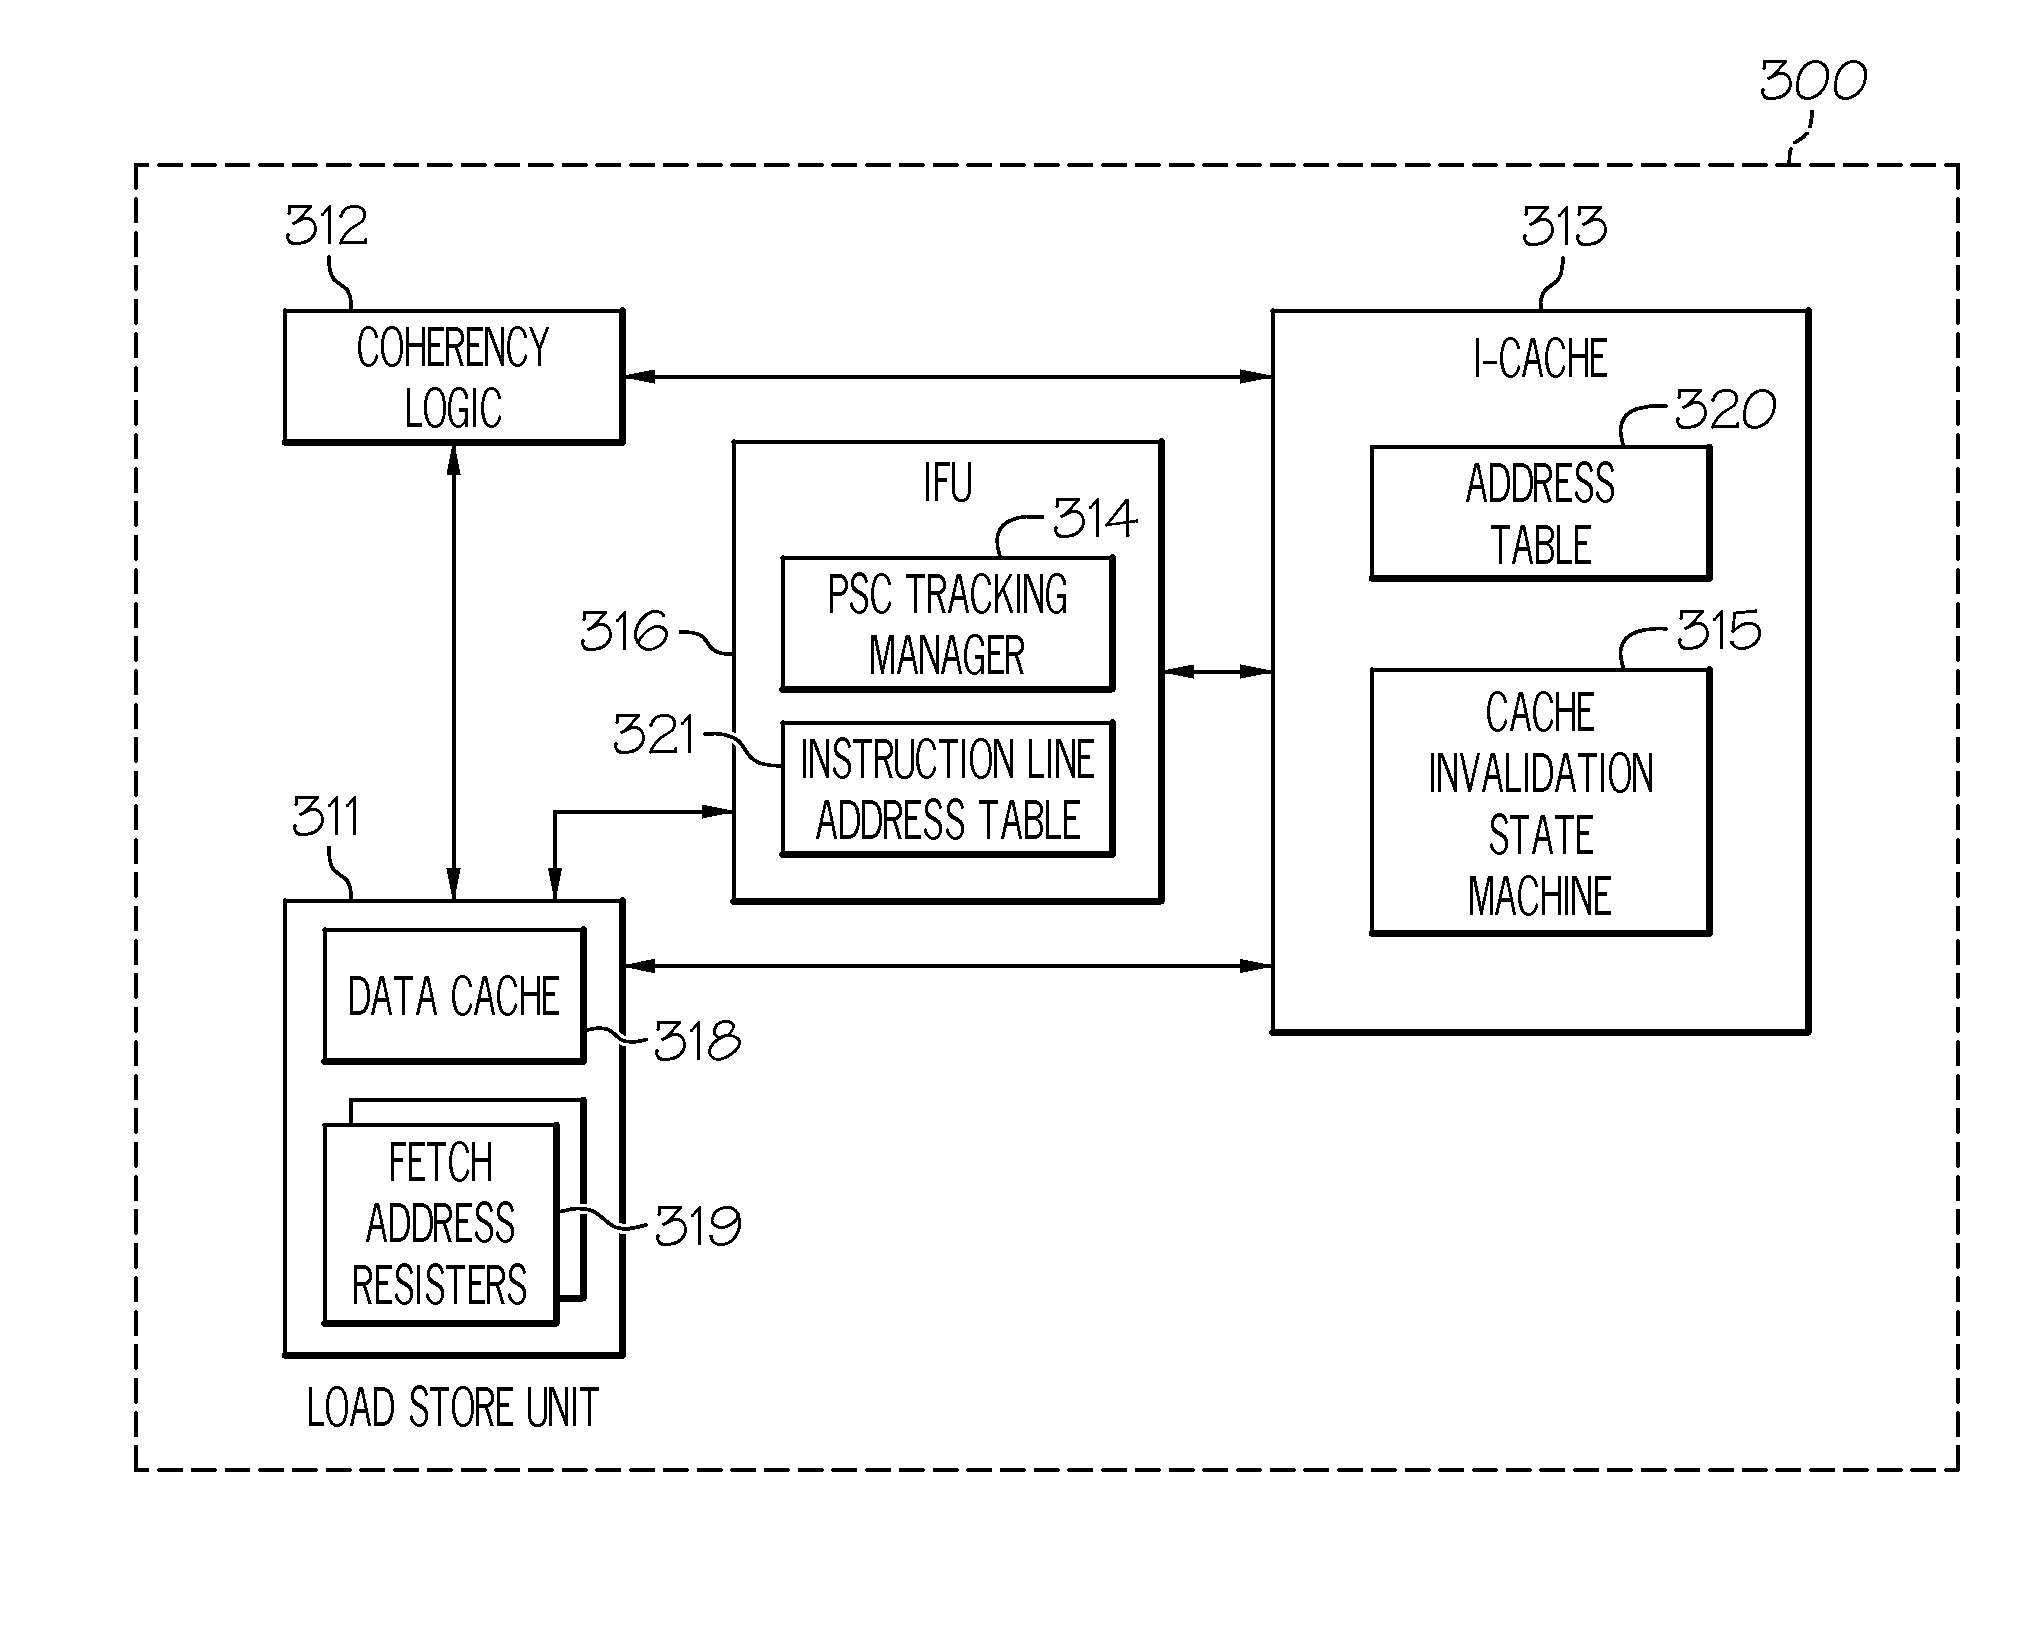 Managing cache coherency for self-modifying code in an out-of-order execution system